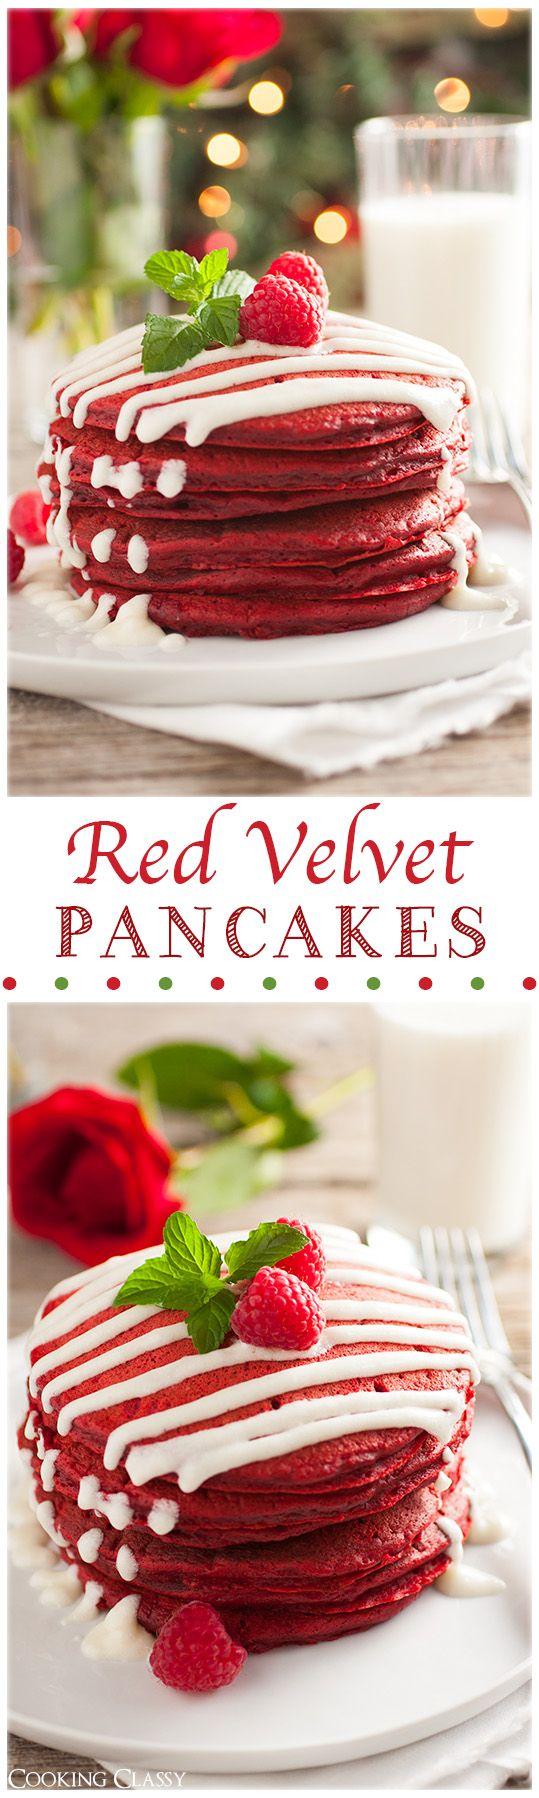 Hochzeit - Red Velvet Pancakes With Cream Cheese Glaze (Perfect For Christmas)